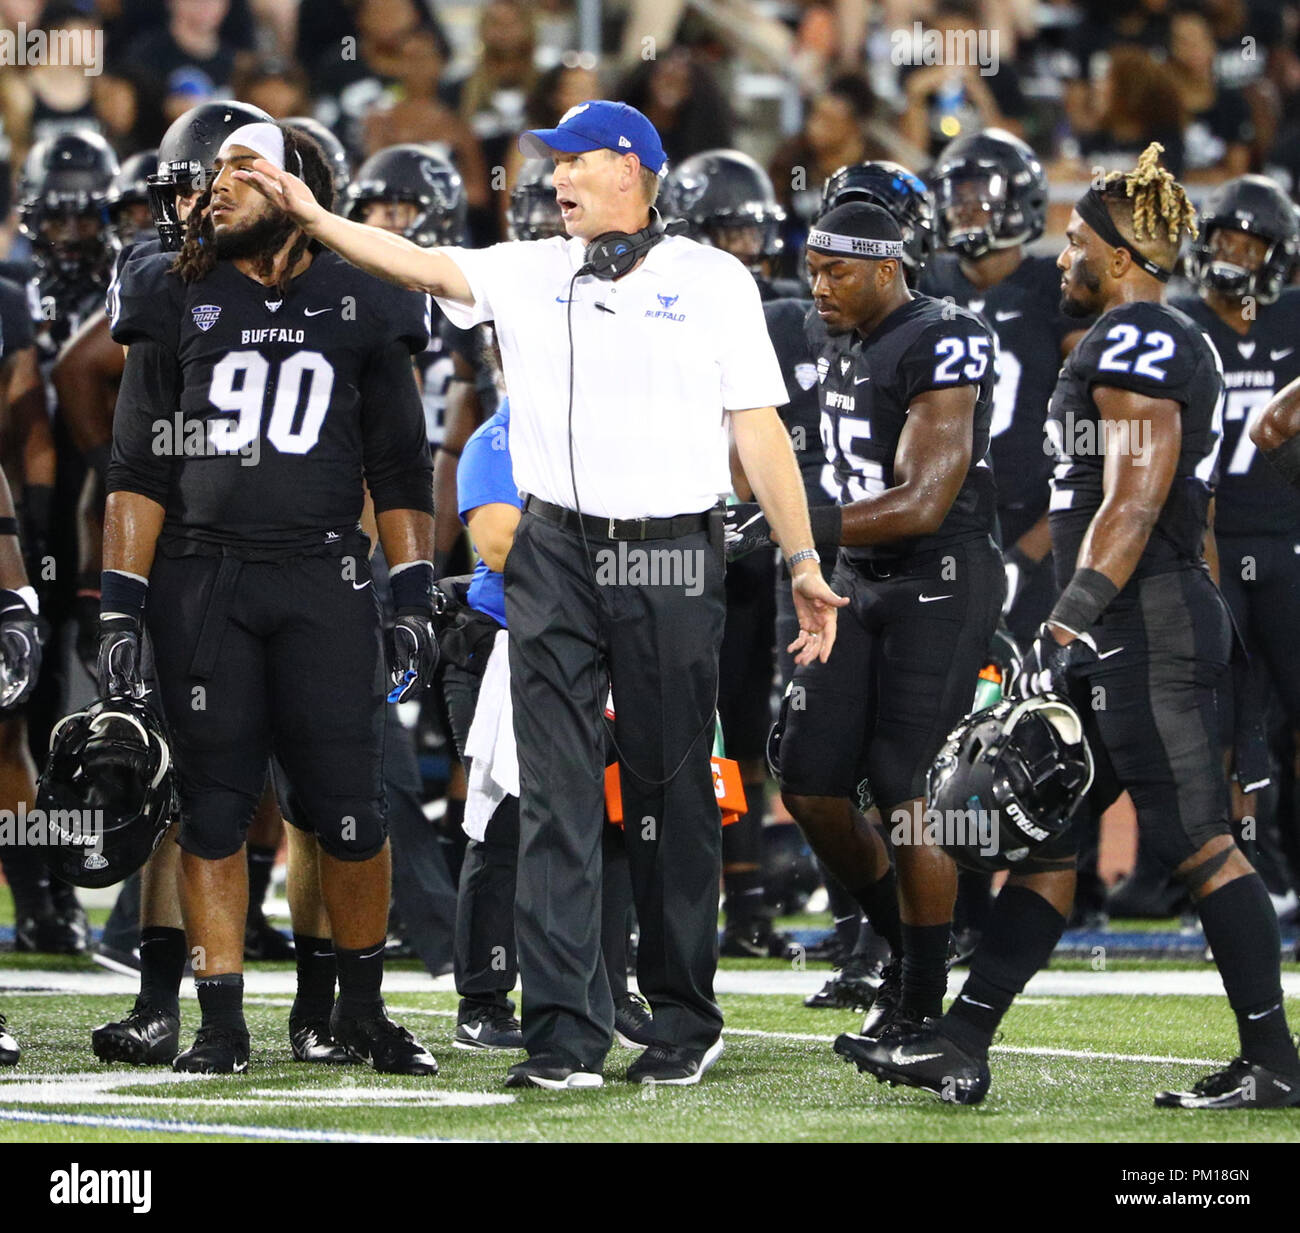 September 15, 2018:Buffalo Bulls head coach Lance Leipold during the second half of play in the NCAA football game between the Eastern Michigan Eagles and Buffalo Bulls at UB Stadium in Amherst, N.Y. Buffalo defeated Eastern Michigan 35-28 to improve their record to 3-0 for the first time as an FBS program. (Nicholas T. LoVerde/Cal Sport Media) Stock Photo